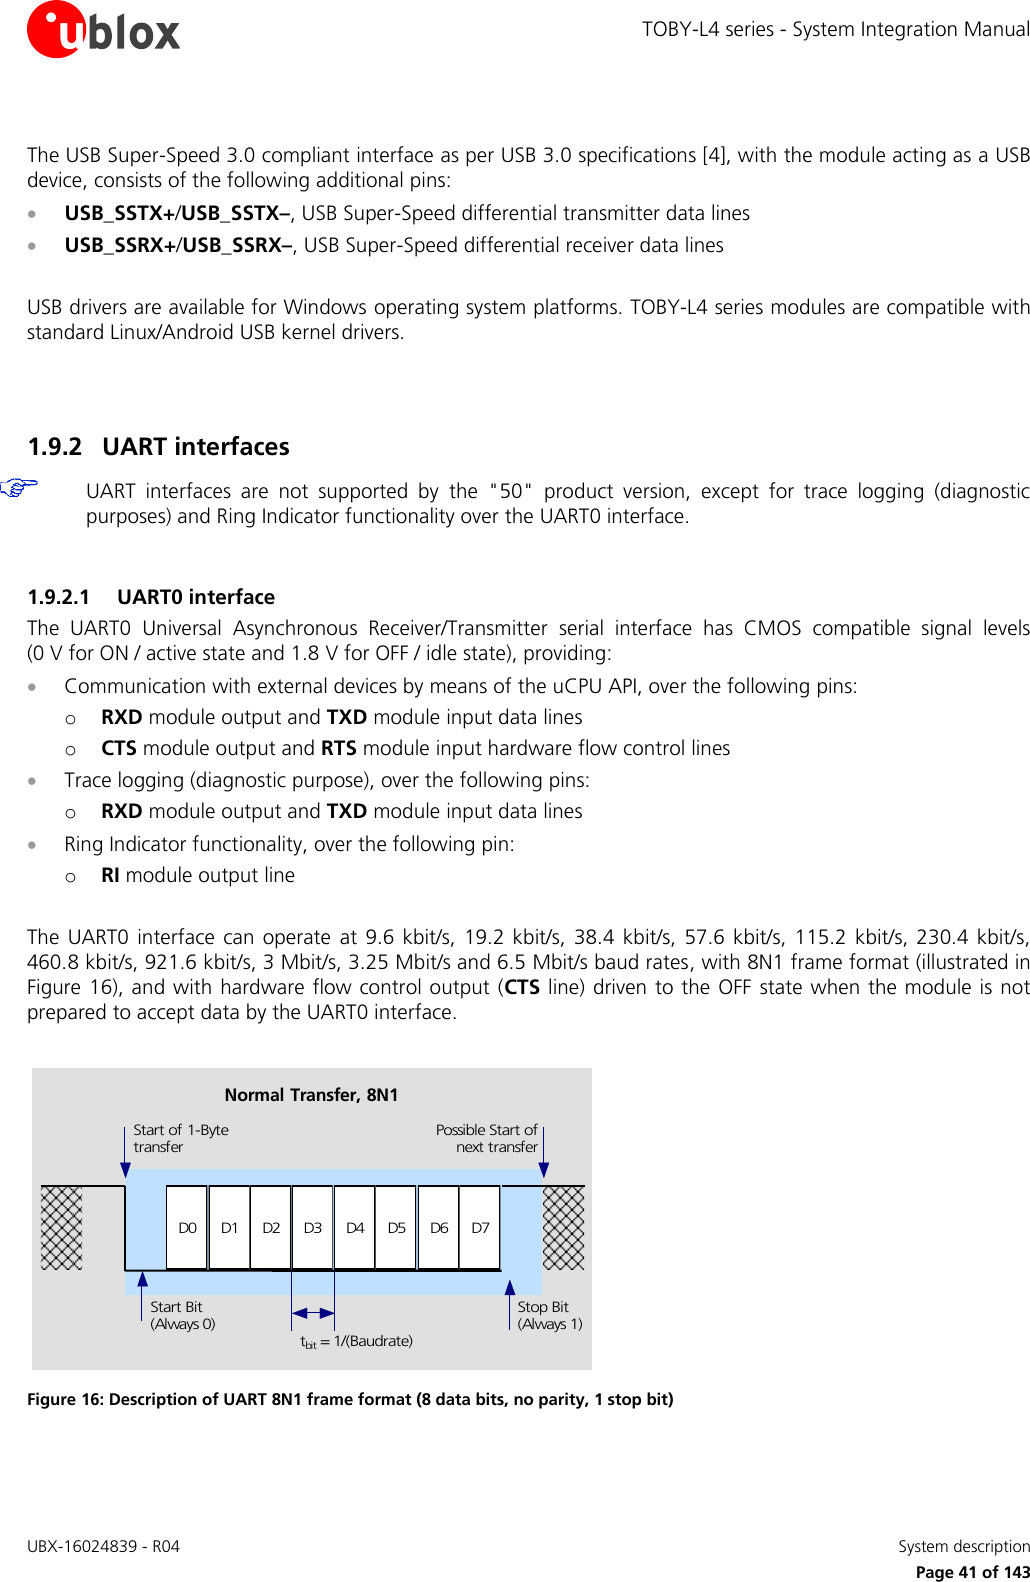 TOBY-L4 series - System Integration Manual UBX-16024839 - R04    System description     Page 41 of 143  The USB Super-Speed 3.0 compliant interface as per USB 3.0 specifications [4], with the module acting as a USB device, consists of the following additional pins:  USB_SSTX+/USB_SSTX–, USB Super-Speed differential transmitter data lines   USB_SSRX+/USB_SSRX–, USB Super-Speed differential receiver data lines   USB drivers are available for Windows operating system platforms. TOBY-L4 series modules are compatible with standard Linux/Android USB kernel drivers.   1.9.2 UART interfaces  UART  interfaces  are  not  supported  by  the  &quot;50&quot;  product  version,  except  for  trace  logging  (diagnostic purposes) and Ring Indicator functionality over the UART0 interface.  1.9.2.1 UART0 interface The  UART0  Universal  Asynchronous  Receiver/Transmitter  serial  interface  has  CMOS  compatible  signal  levels (0 V for ON / active state and 1.8 V for OFF / idle state), providing:  Communication with external devices by means of the uCPU API, over the following pins: o RXD module output and TXD module input data lines  o CTS module output and RTS module input hardware flow control lines  Trace logging (diagnostic purpose), over the following pins: o RXD module output and TXD module input data lines   Ring Indicator functionality, over the following pin: o RI module output line  The  UART0 interface  can  operate  at  9.6 kbit/s,  19.2 kbit/s,  38.4  kbit/s,  57.6  kbit/s,  115.2  kbit/s, 230.4 kbit/s, 460.8 kbit/s, 921.6 kbit/s, 3 Mbit/s, 3.25 Mbit/s and 6.5 Mbit/s baud rates, with 8N1 frame format (illustrated in Figure 16), and with hardware flow control output (CTS line) driven to the OFF state when the module is not prepared to accept data by the UART0 interface.  D0 D1 D2 D3 D4 D5 D6 D7Start of 1-BytetransferStart Bit(Always 0)Possible Start ofnext transferStop Bit(Always 1)tbit = 1/(Baudrate)Normal Transfer, 8N1 Figure 16: Description of UART 8N1 frame format (8 data bits, no parity, 1 stop bit)   